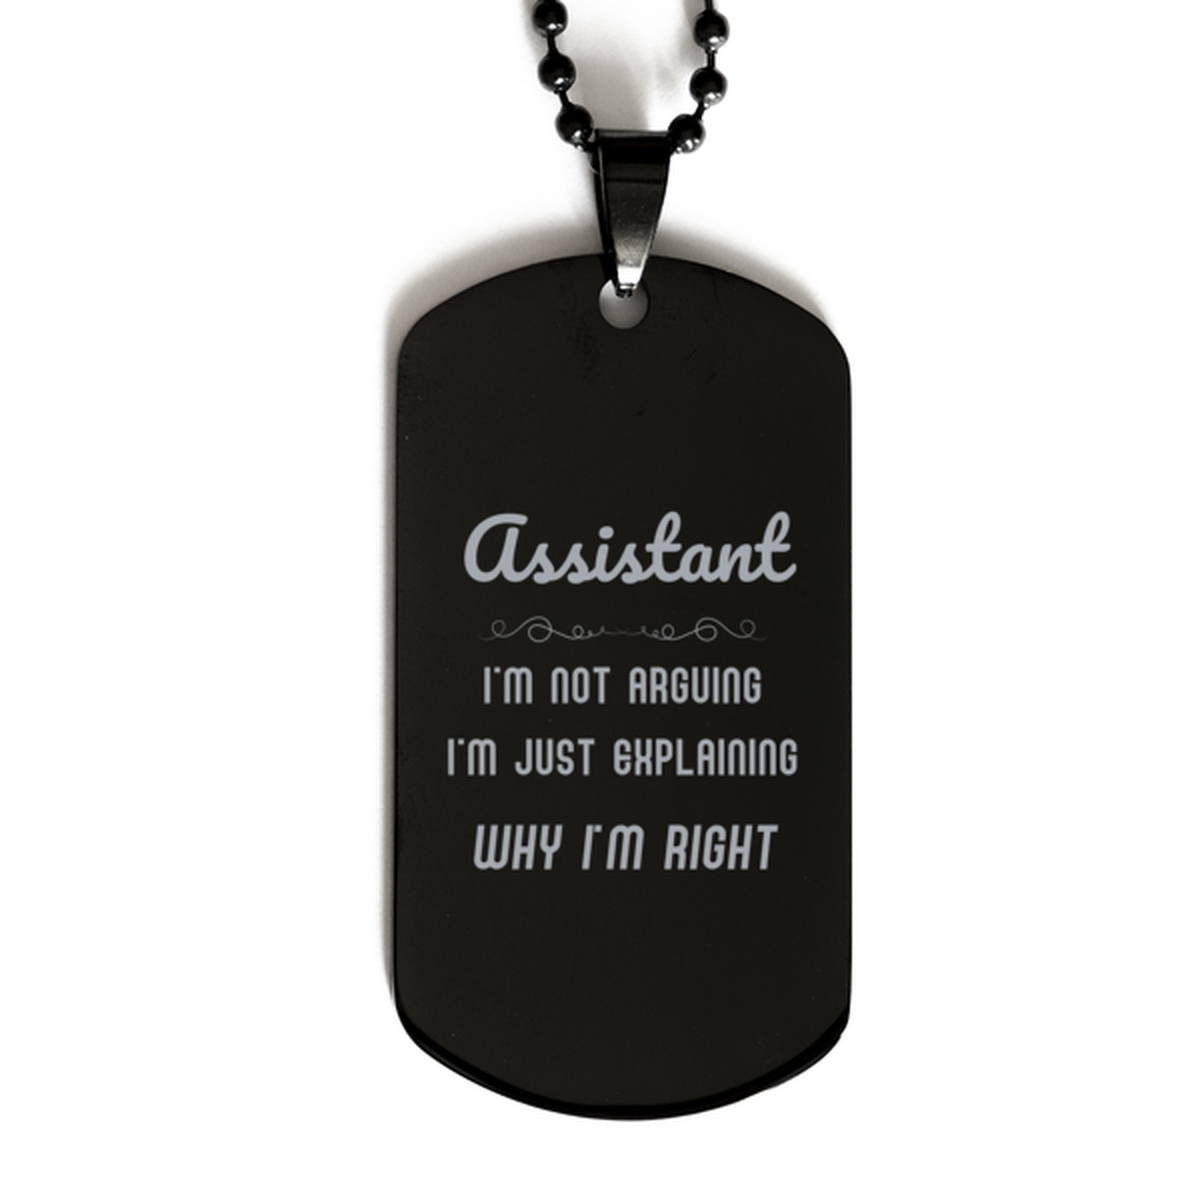 Assistant I'm not Arguing. I'm Just Explaining Why I'm RIGHT Black Dog Tag, Funny Saying Quote Assistant Gifts For Assistant Graduation Birthday Christmas Gifts for Men Women Coworker